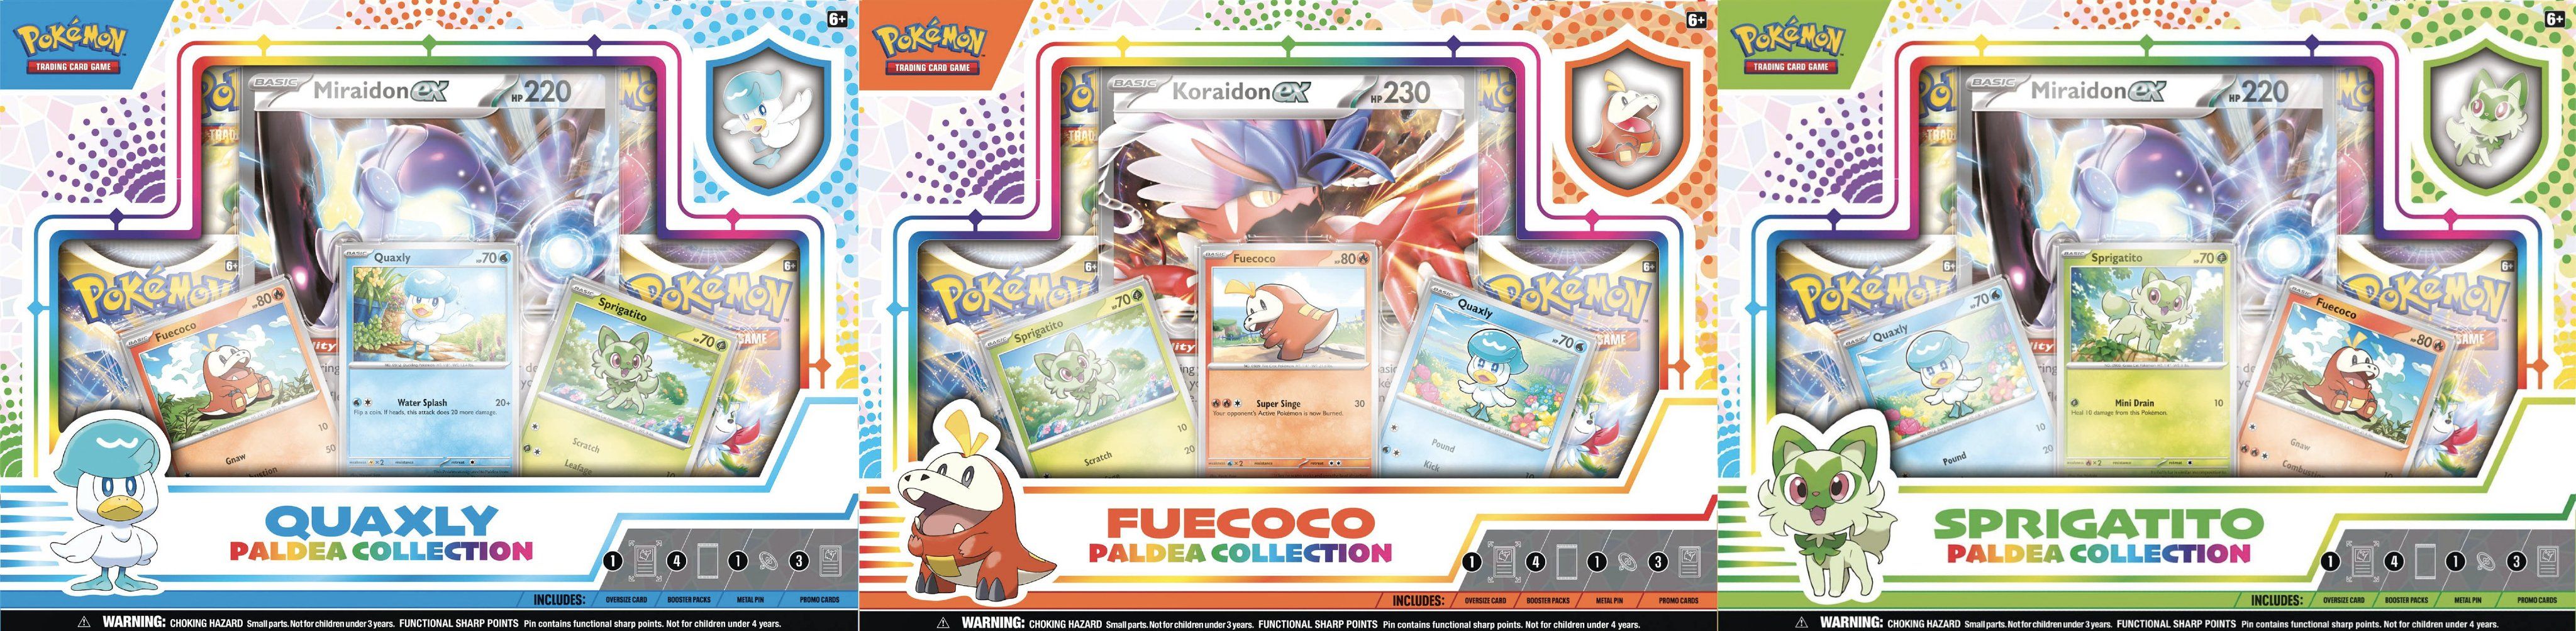 Pokemon TCG Paldea Collections, from left to right: Quaxly, Fuecoco, and Sprigatito.